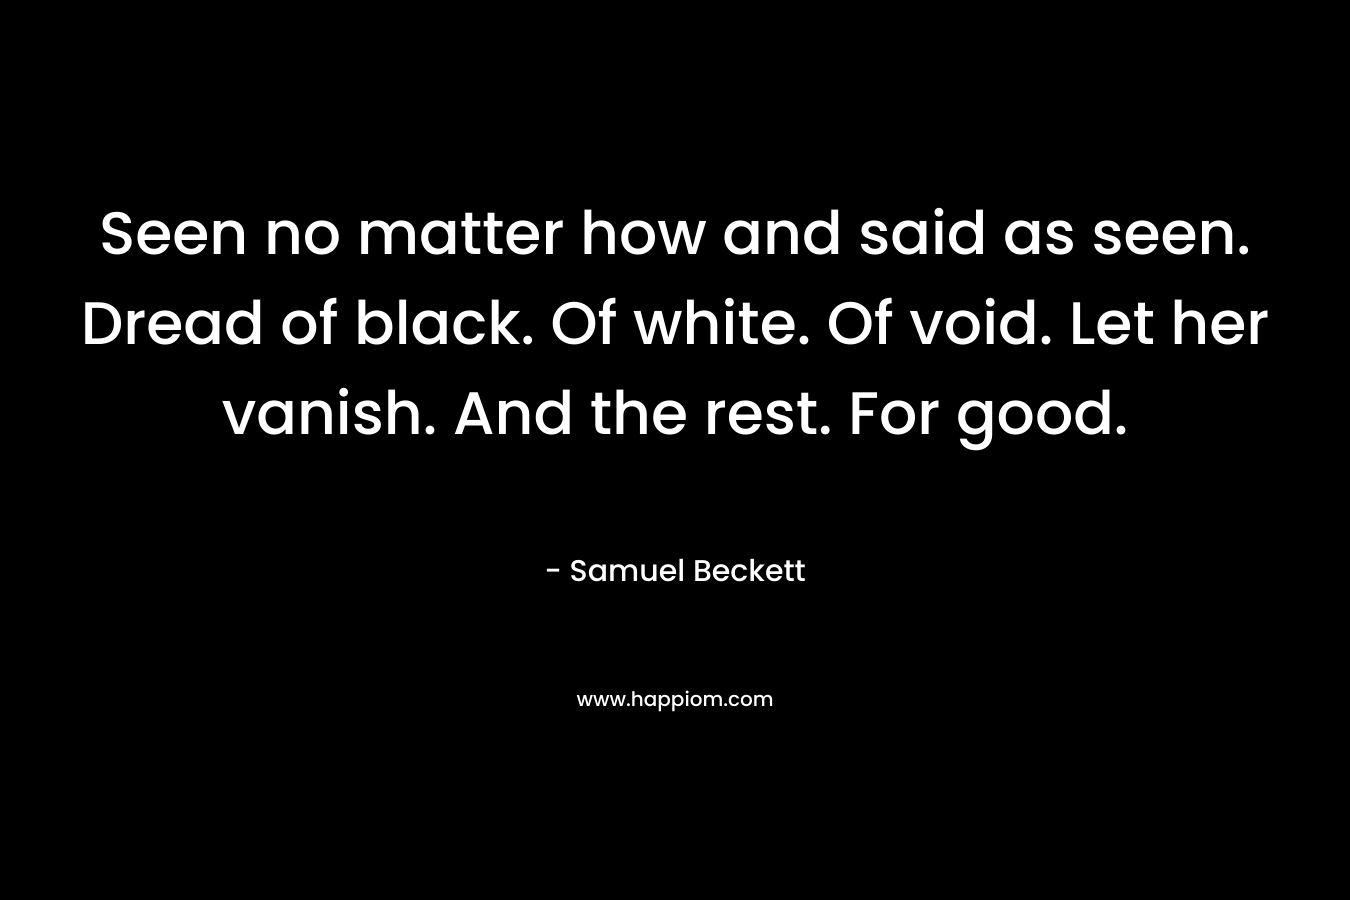 Seen no matter how and said as seen. Dread of black. Of white. Of void. Let her vanish. And the rest. For good. – Samuel Beckett